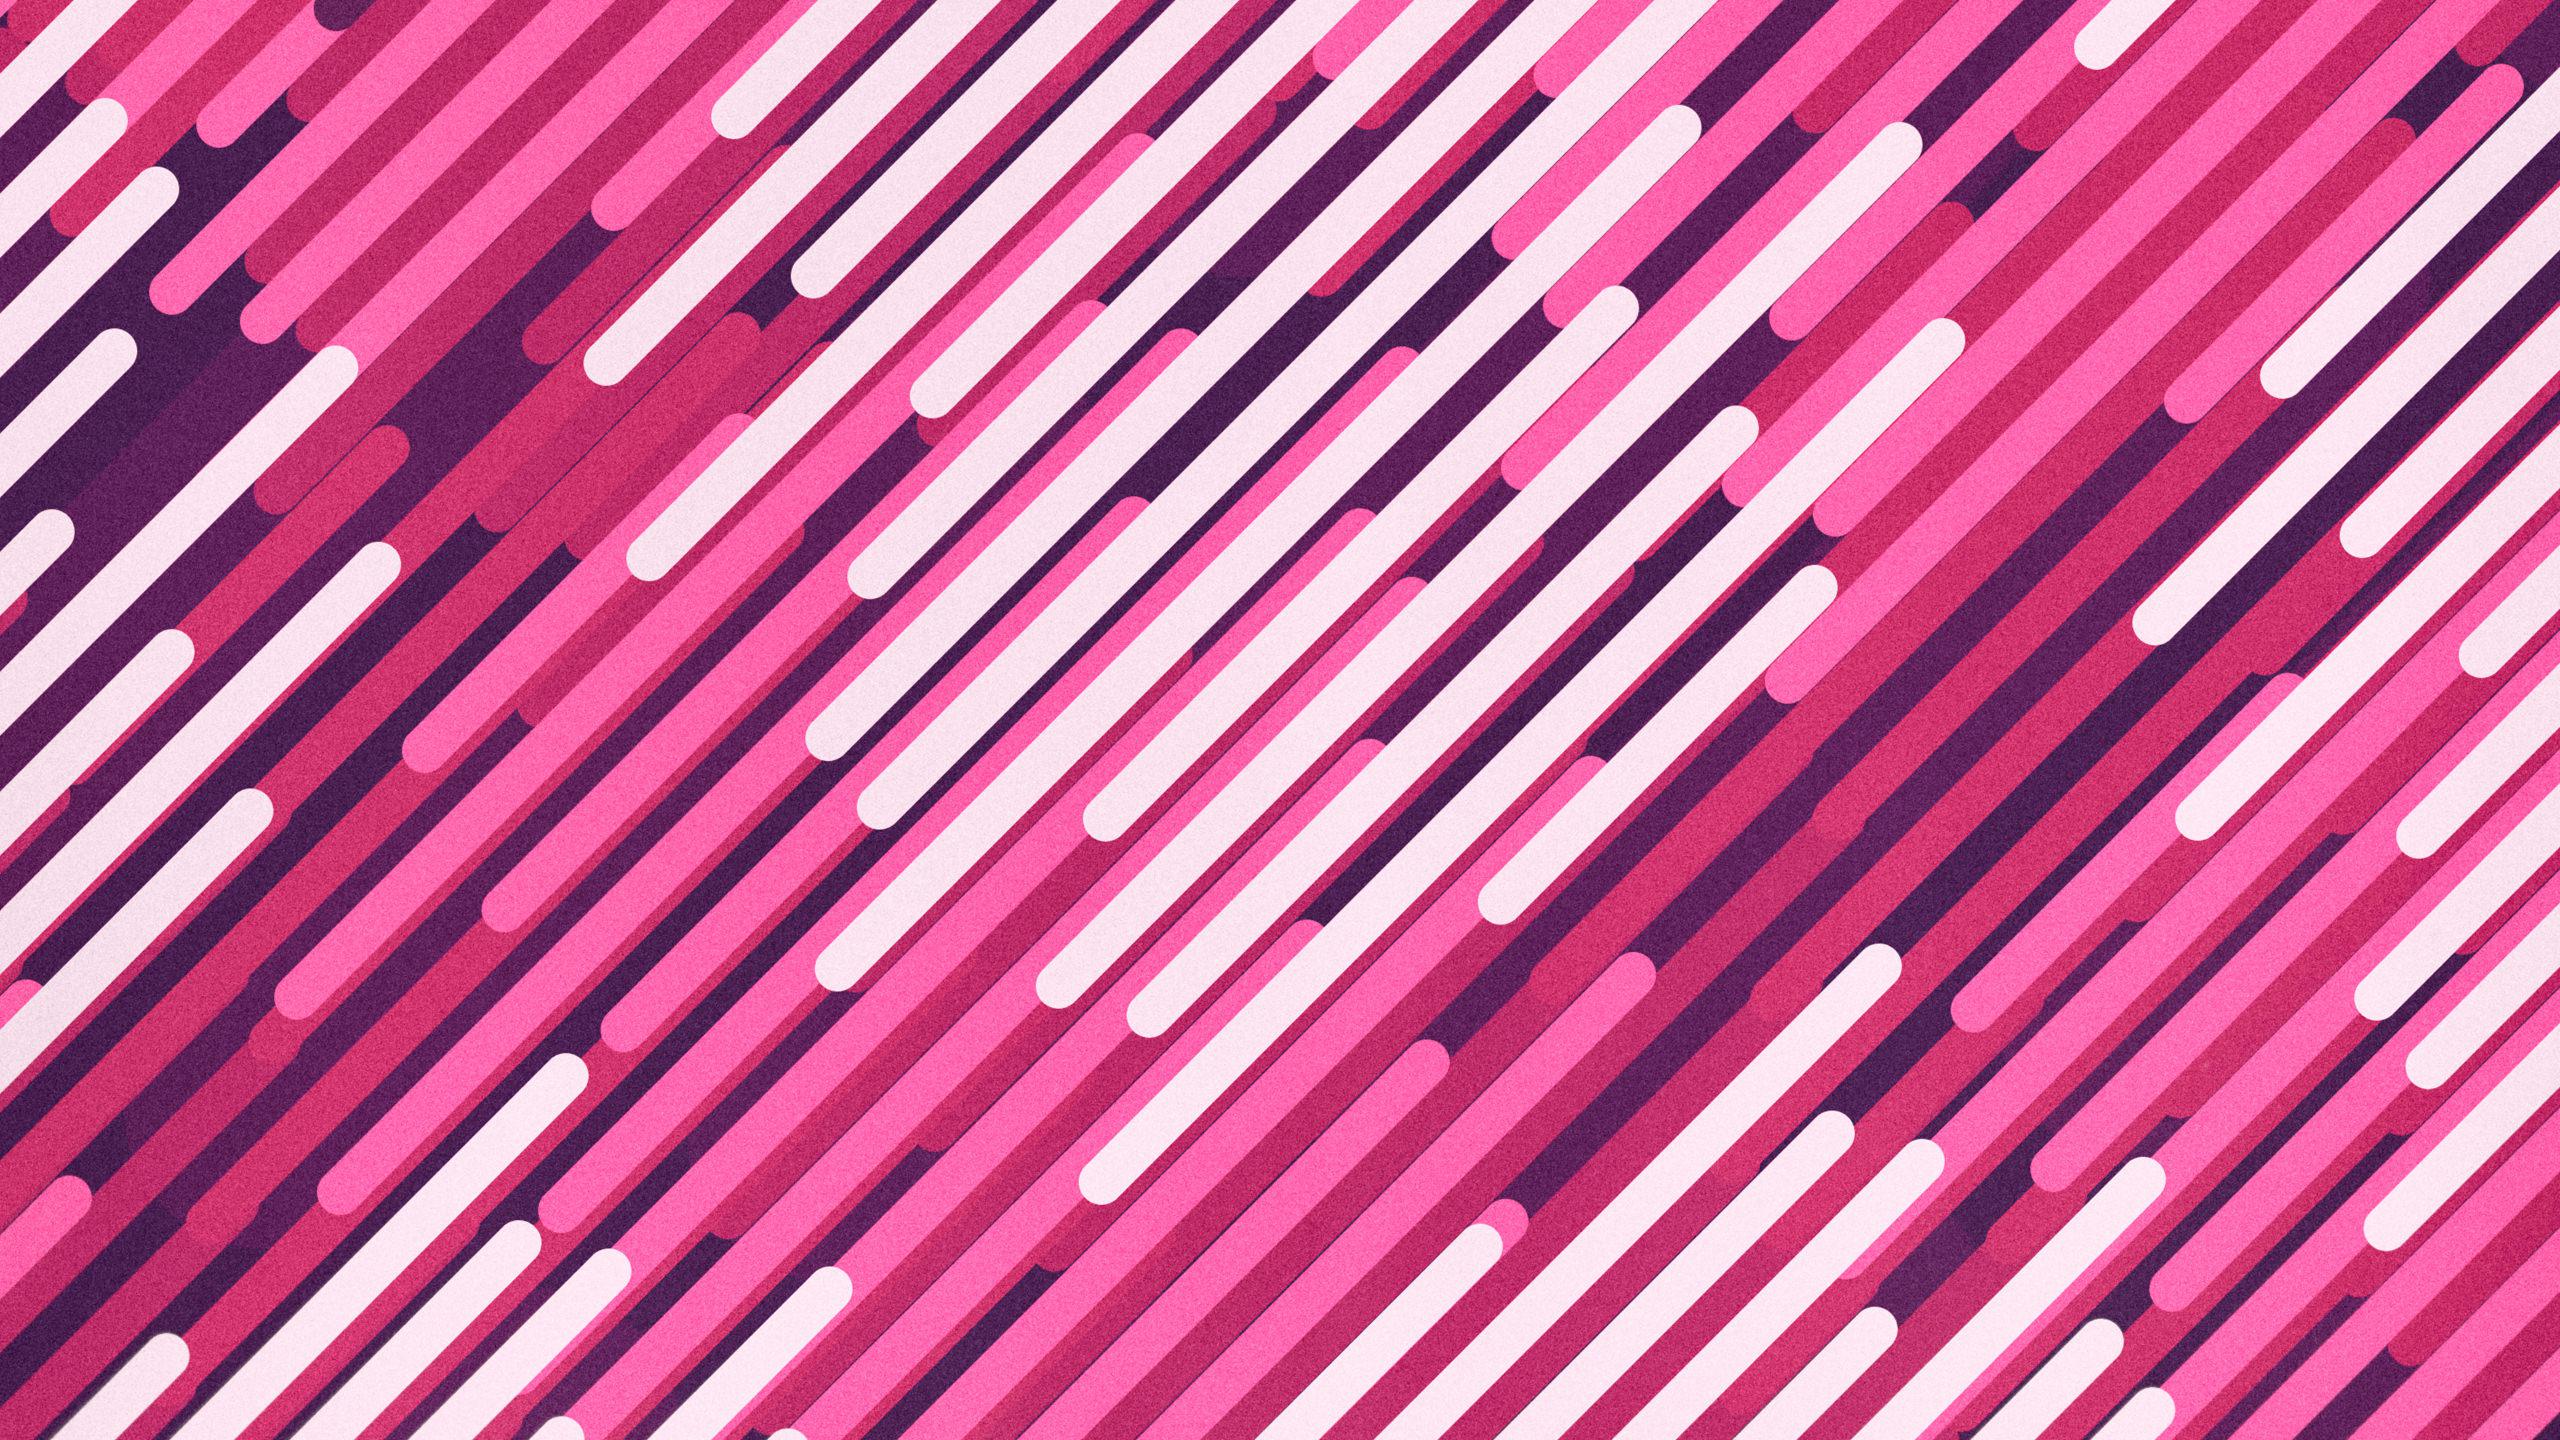 pink 4K wallpaper for your desktop or mobile screen free and easy